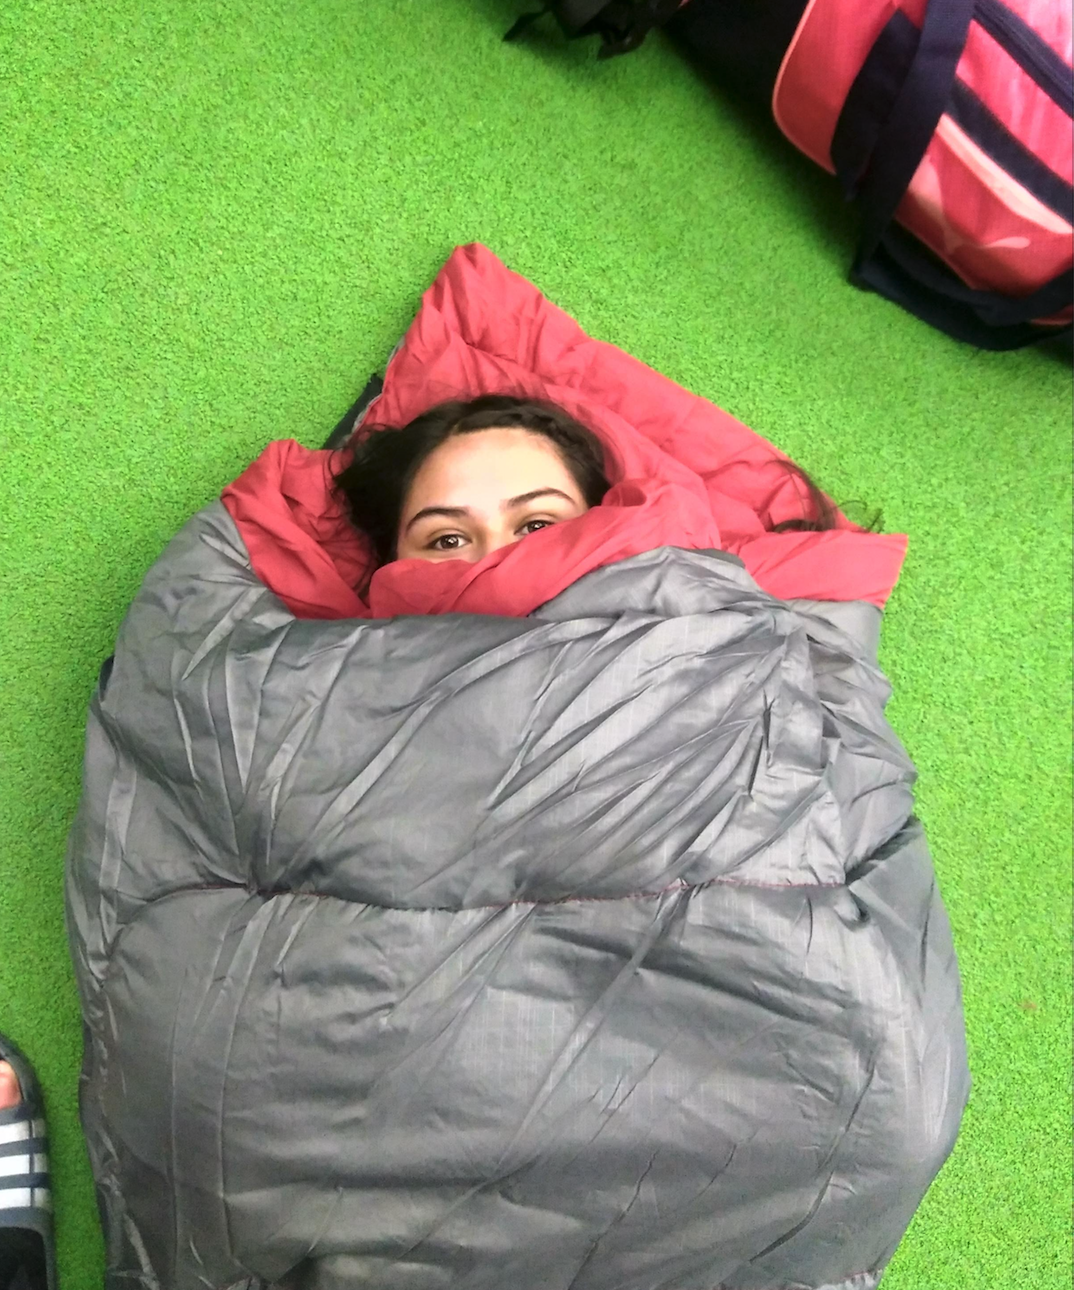 Staying cozy in a sleeping bag at orientation